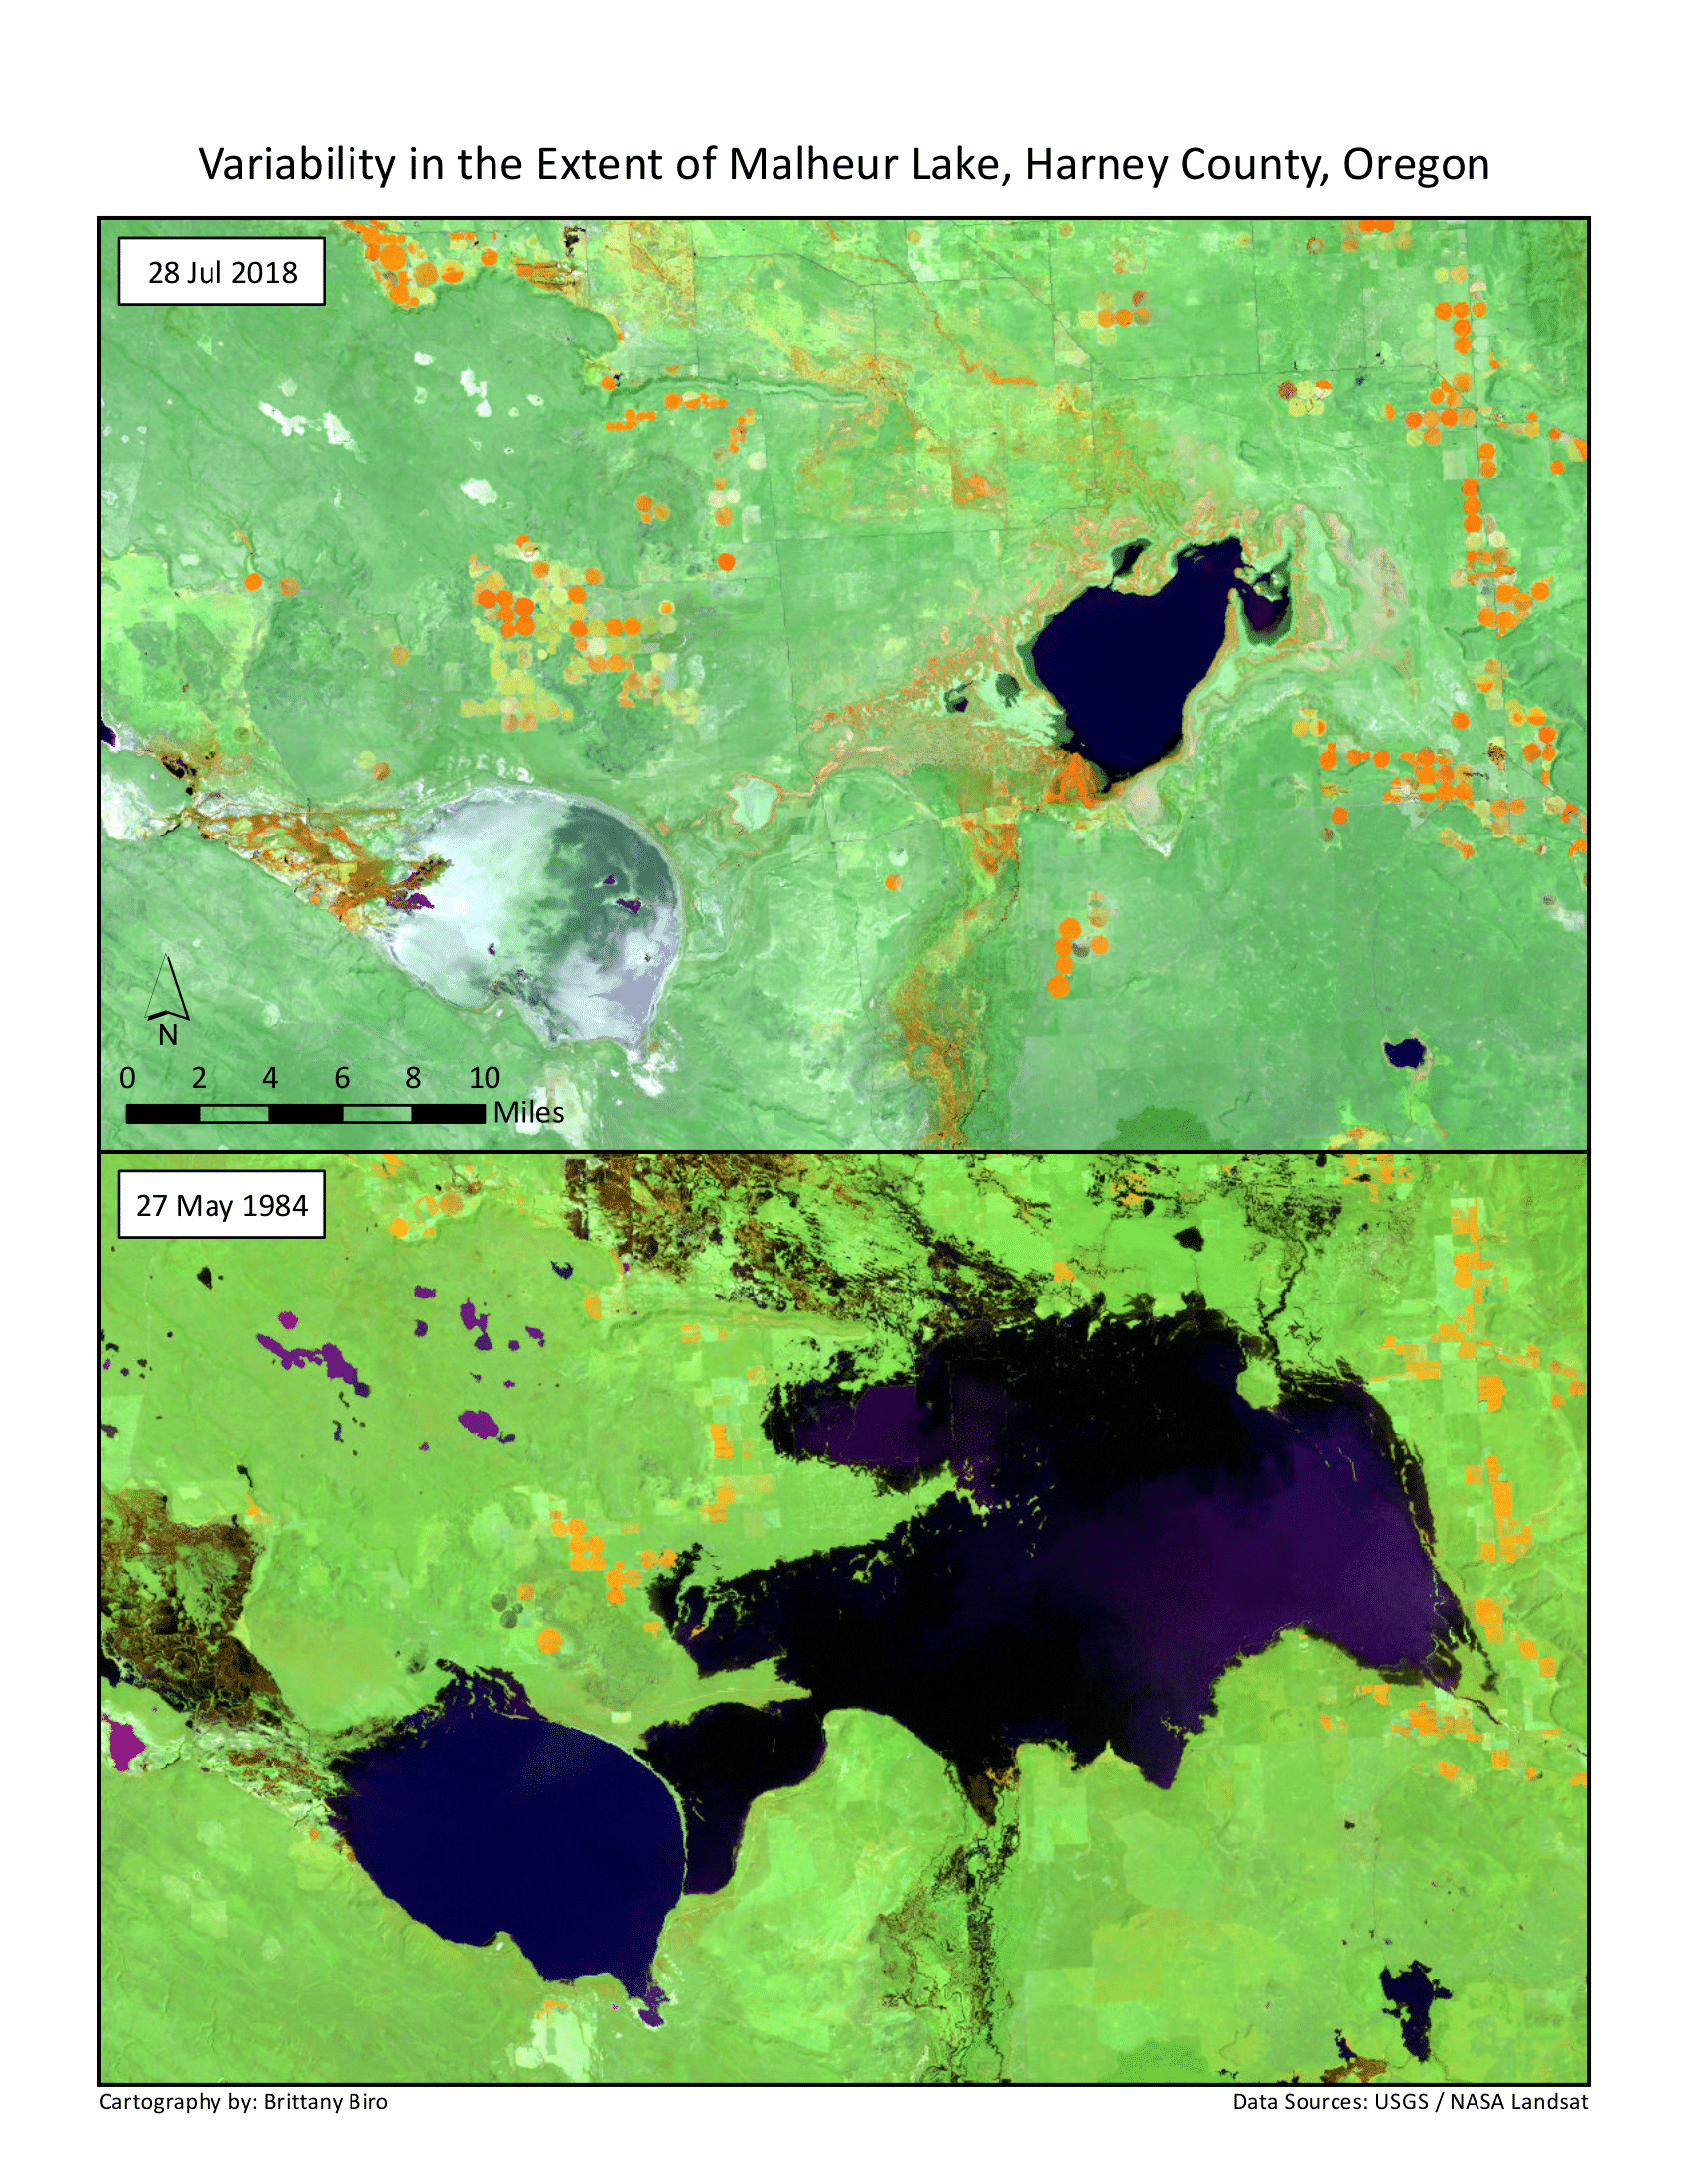 Variability in Extent of Malheur Lake